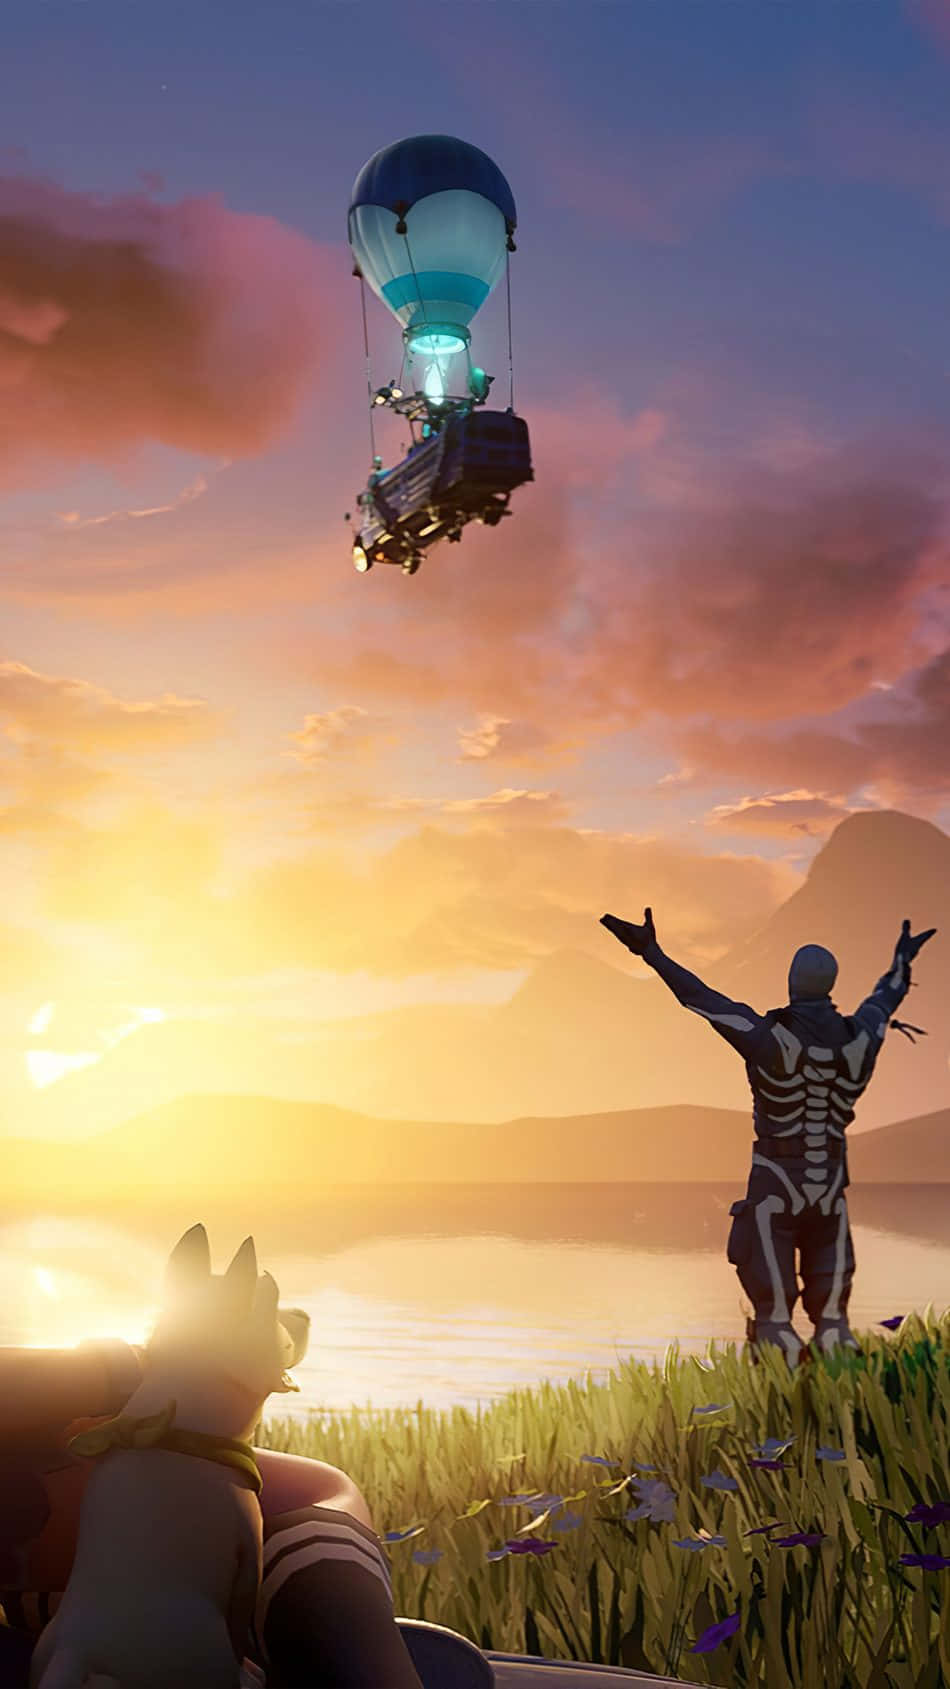 Fortnite - A Man Is Flying A Balloon Over A Lake Wallpaper